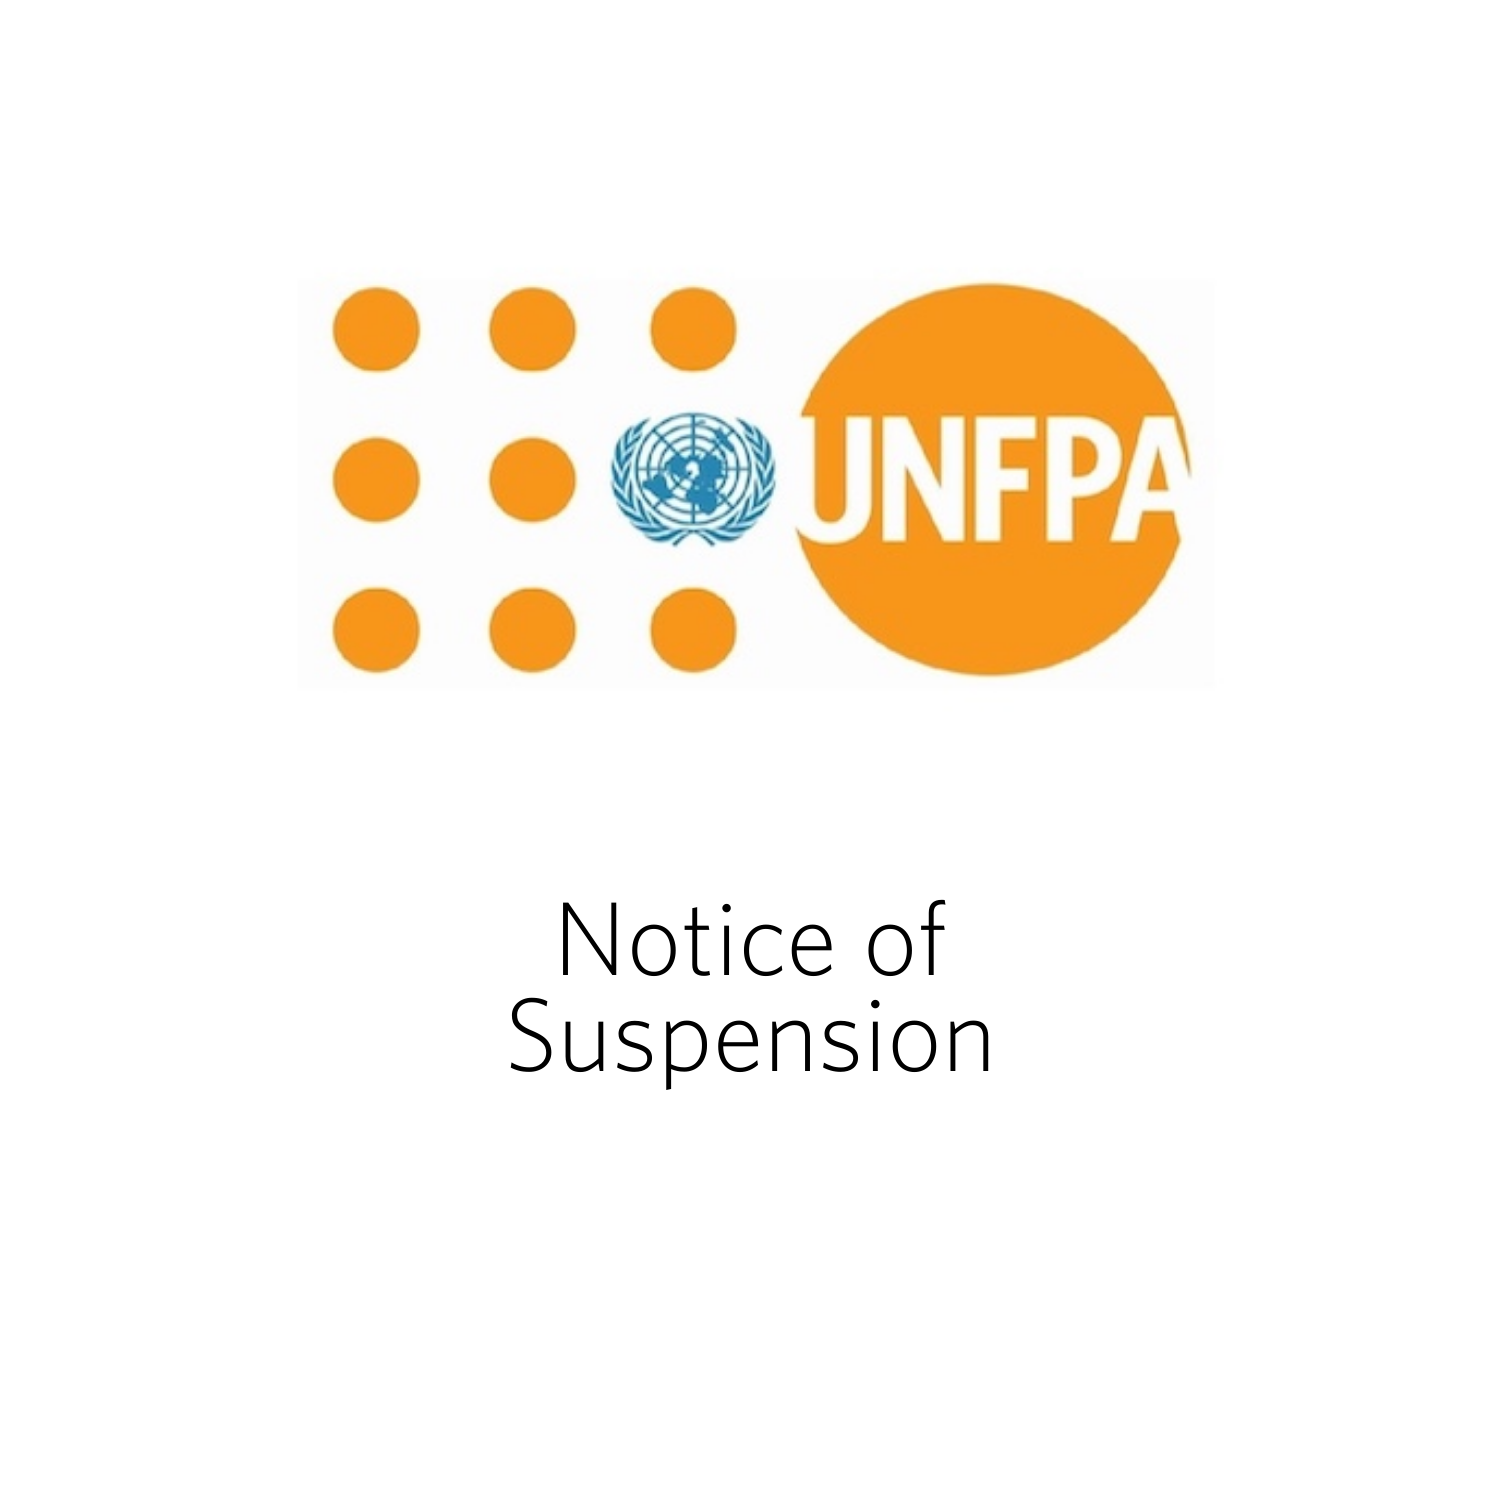 Update to UNFPA Notice of Suspension for MHL Healthcare Ltd.